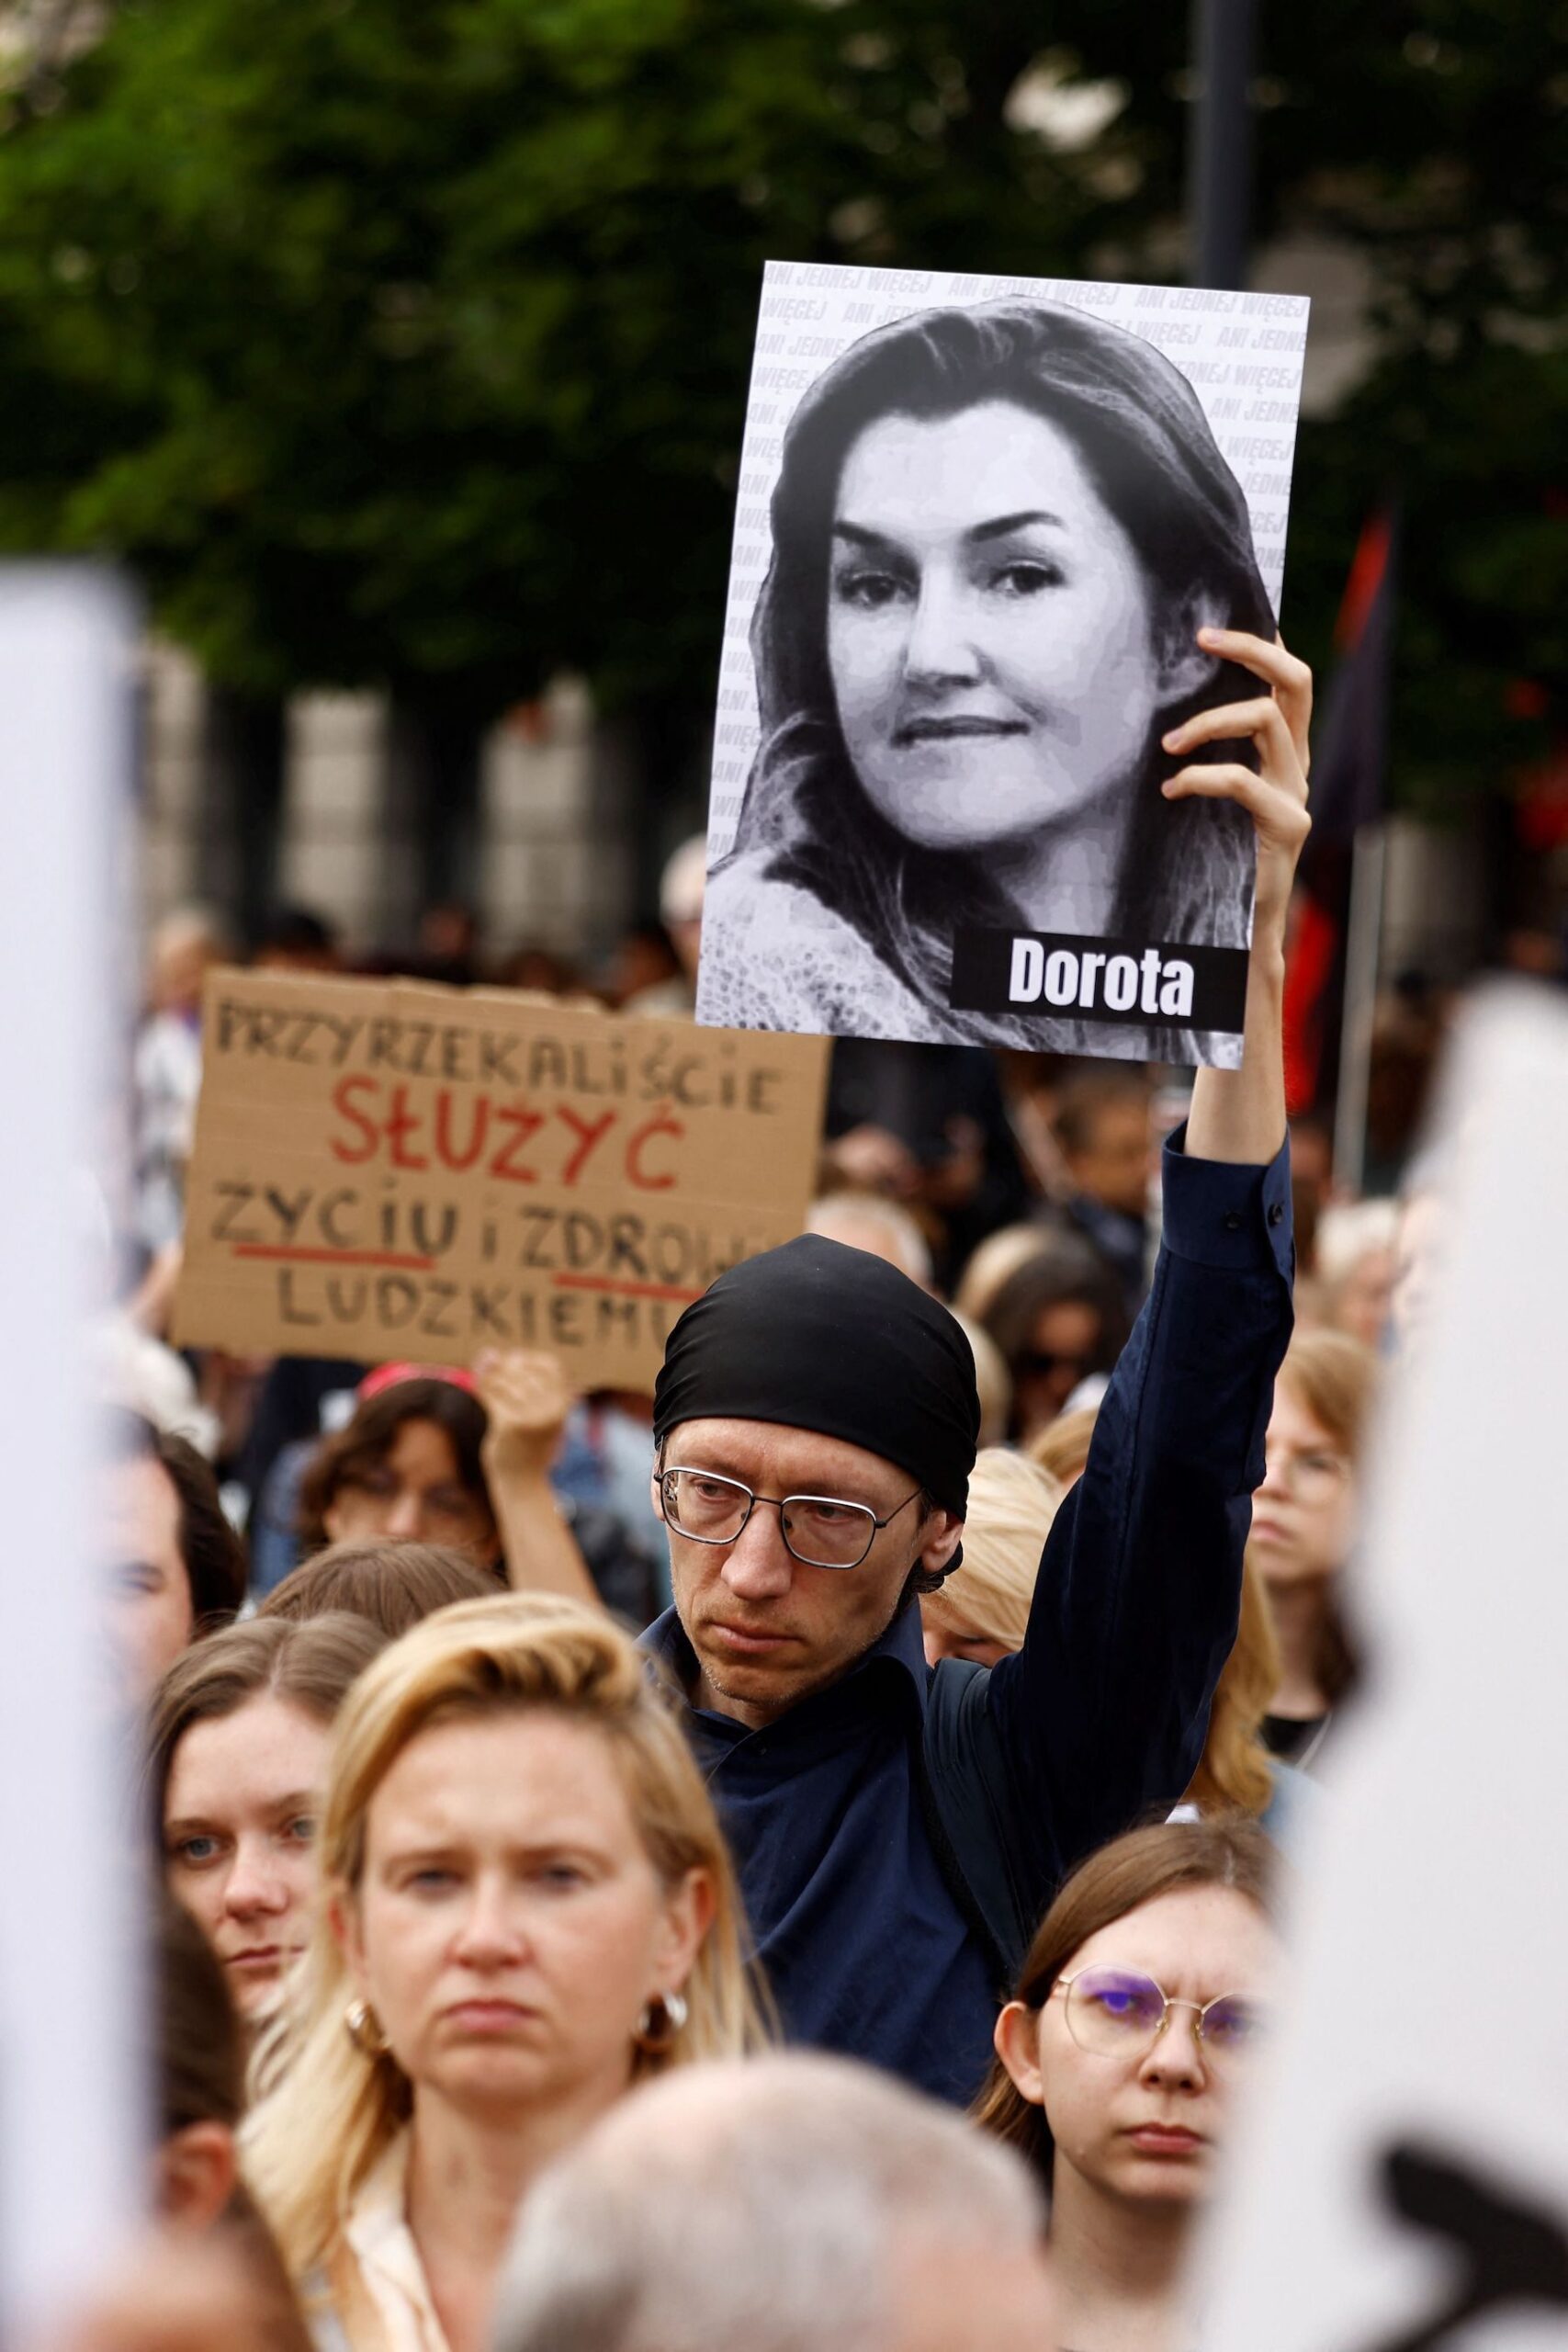 This Woman In Poland Died After She Was Denied An Abortion And People Are Protesting